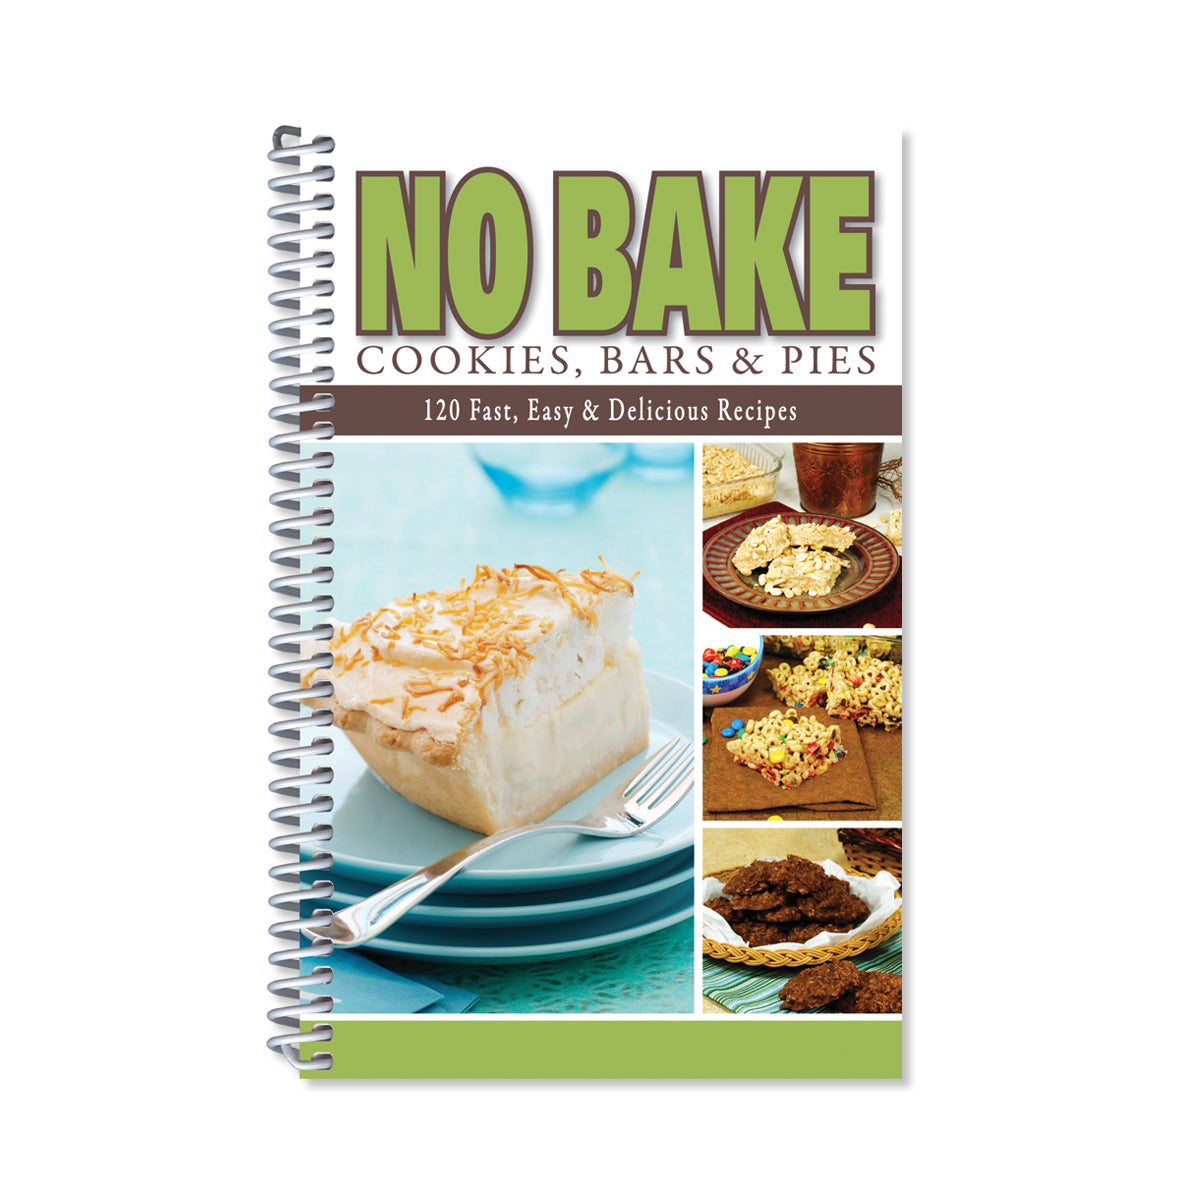 No Bake Cookies, Bars, and Pies. 120 Fast, Easy, and Delicious Recipes.